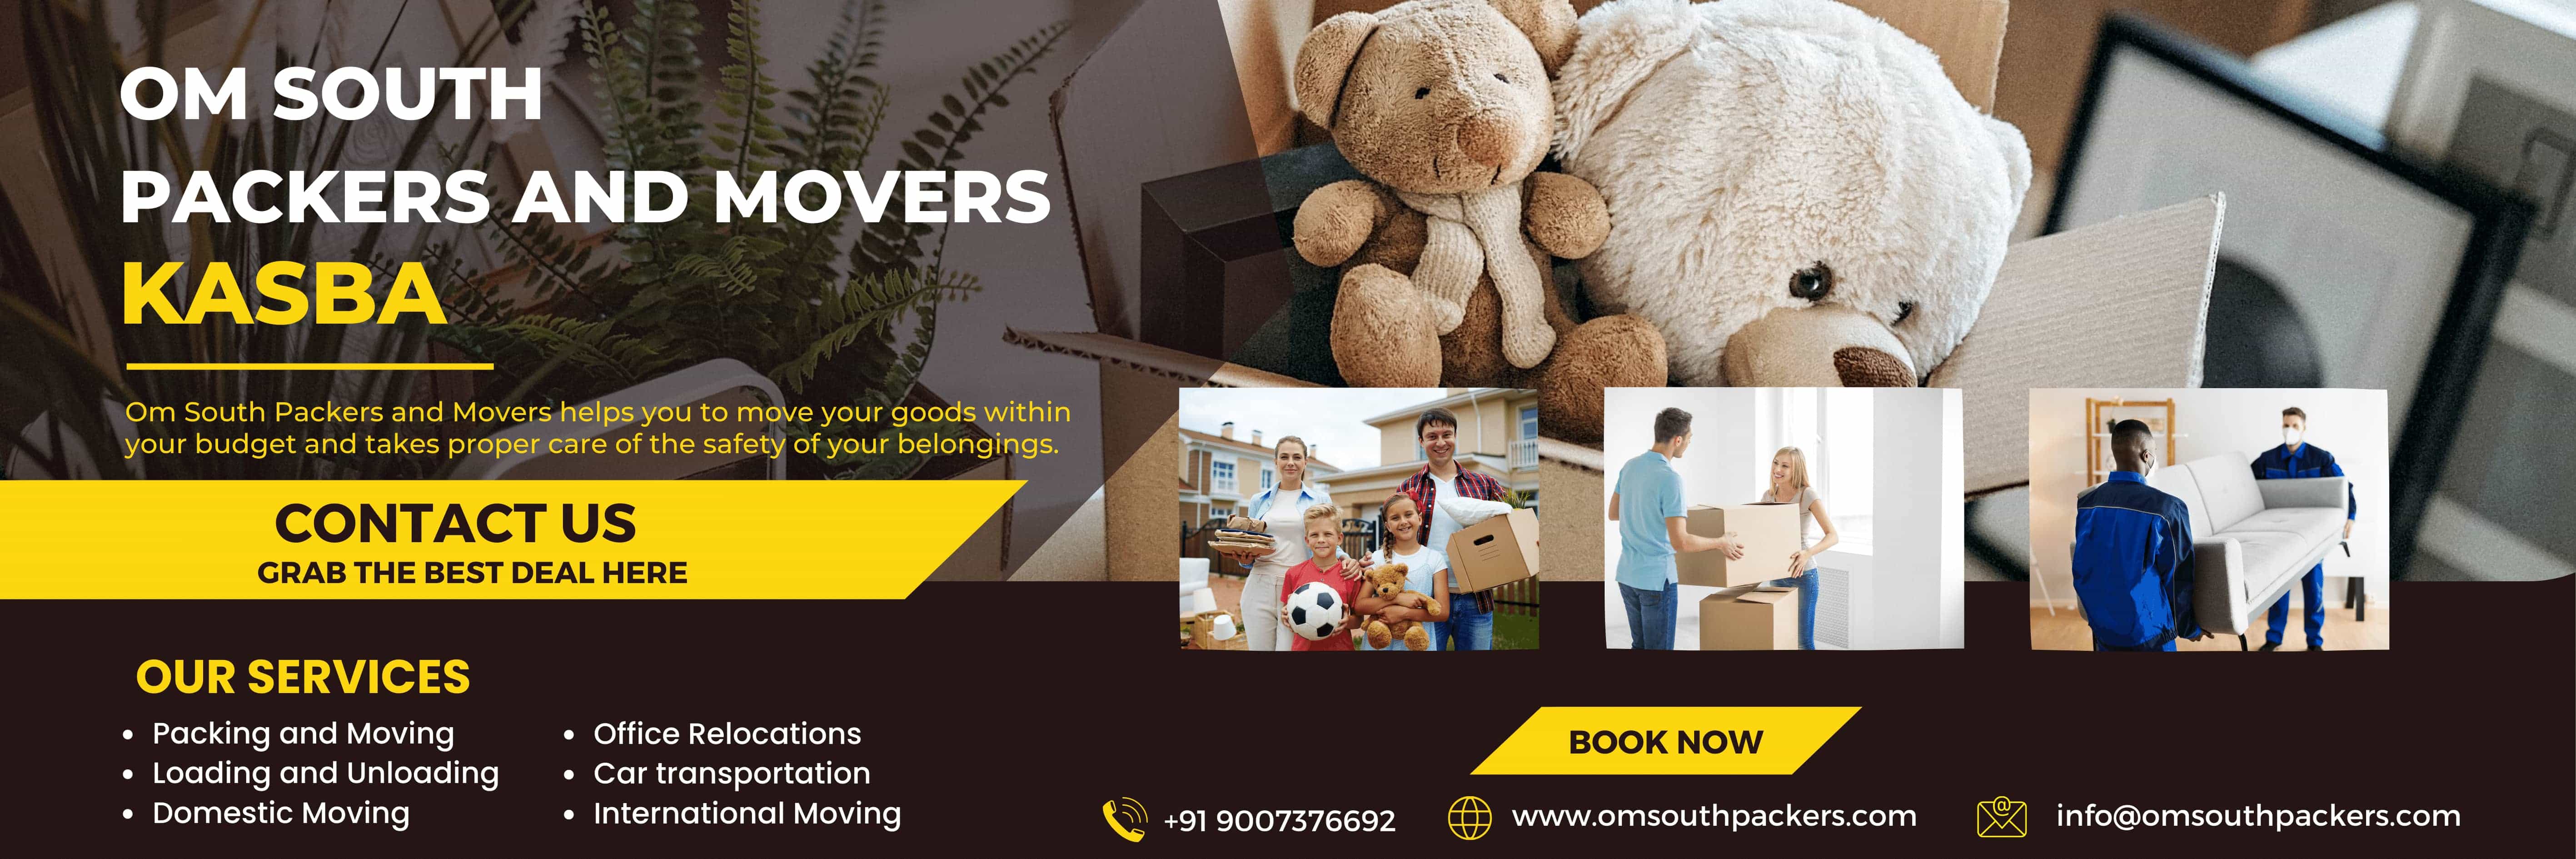 Packers and Movers Kasba